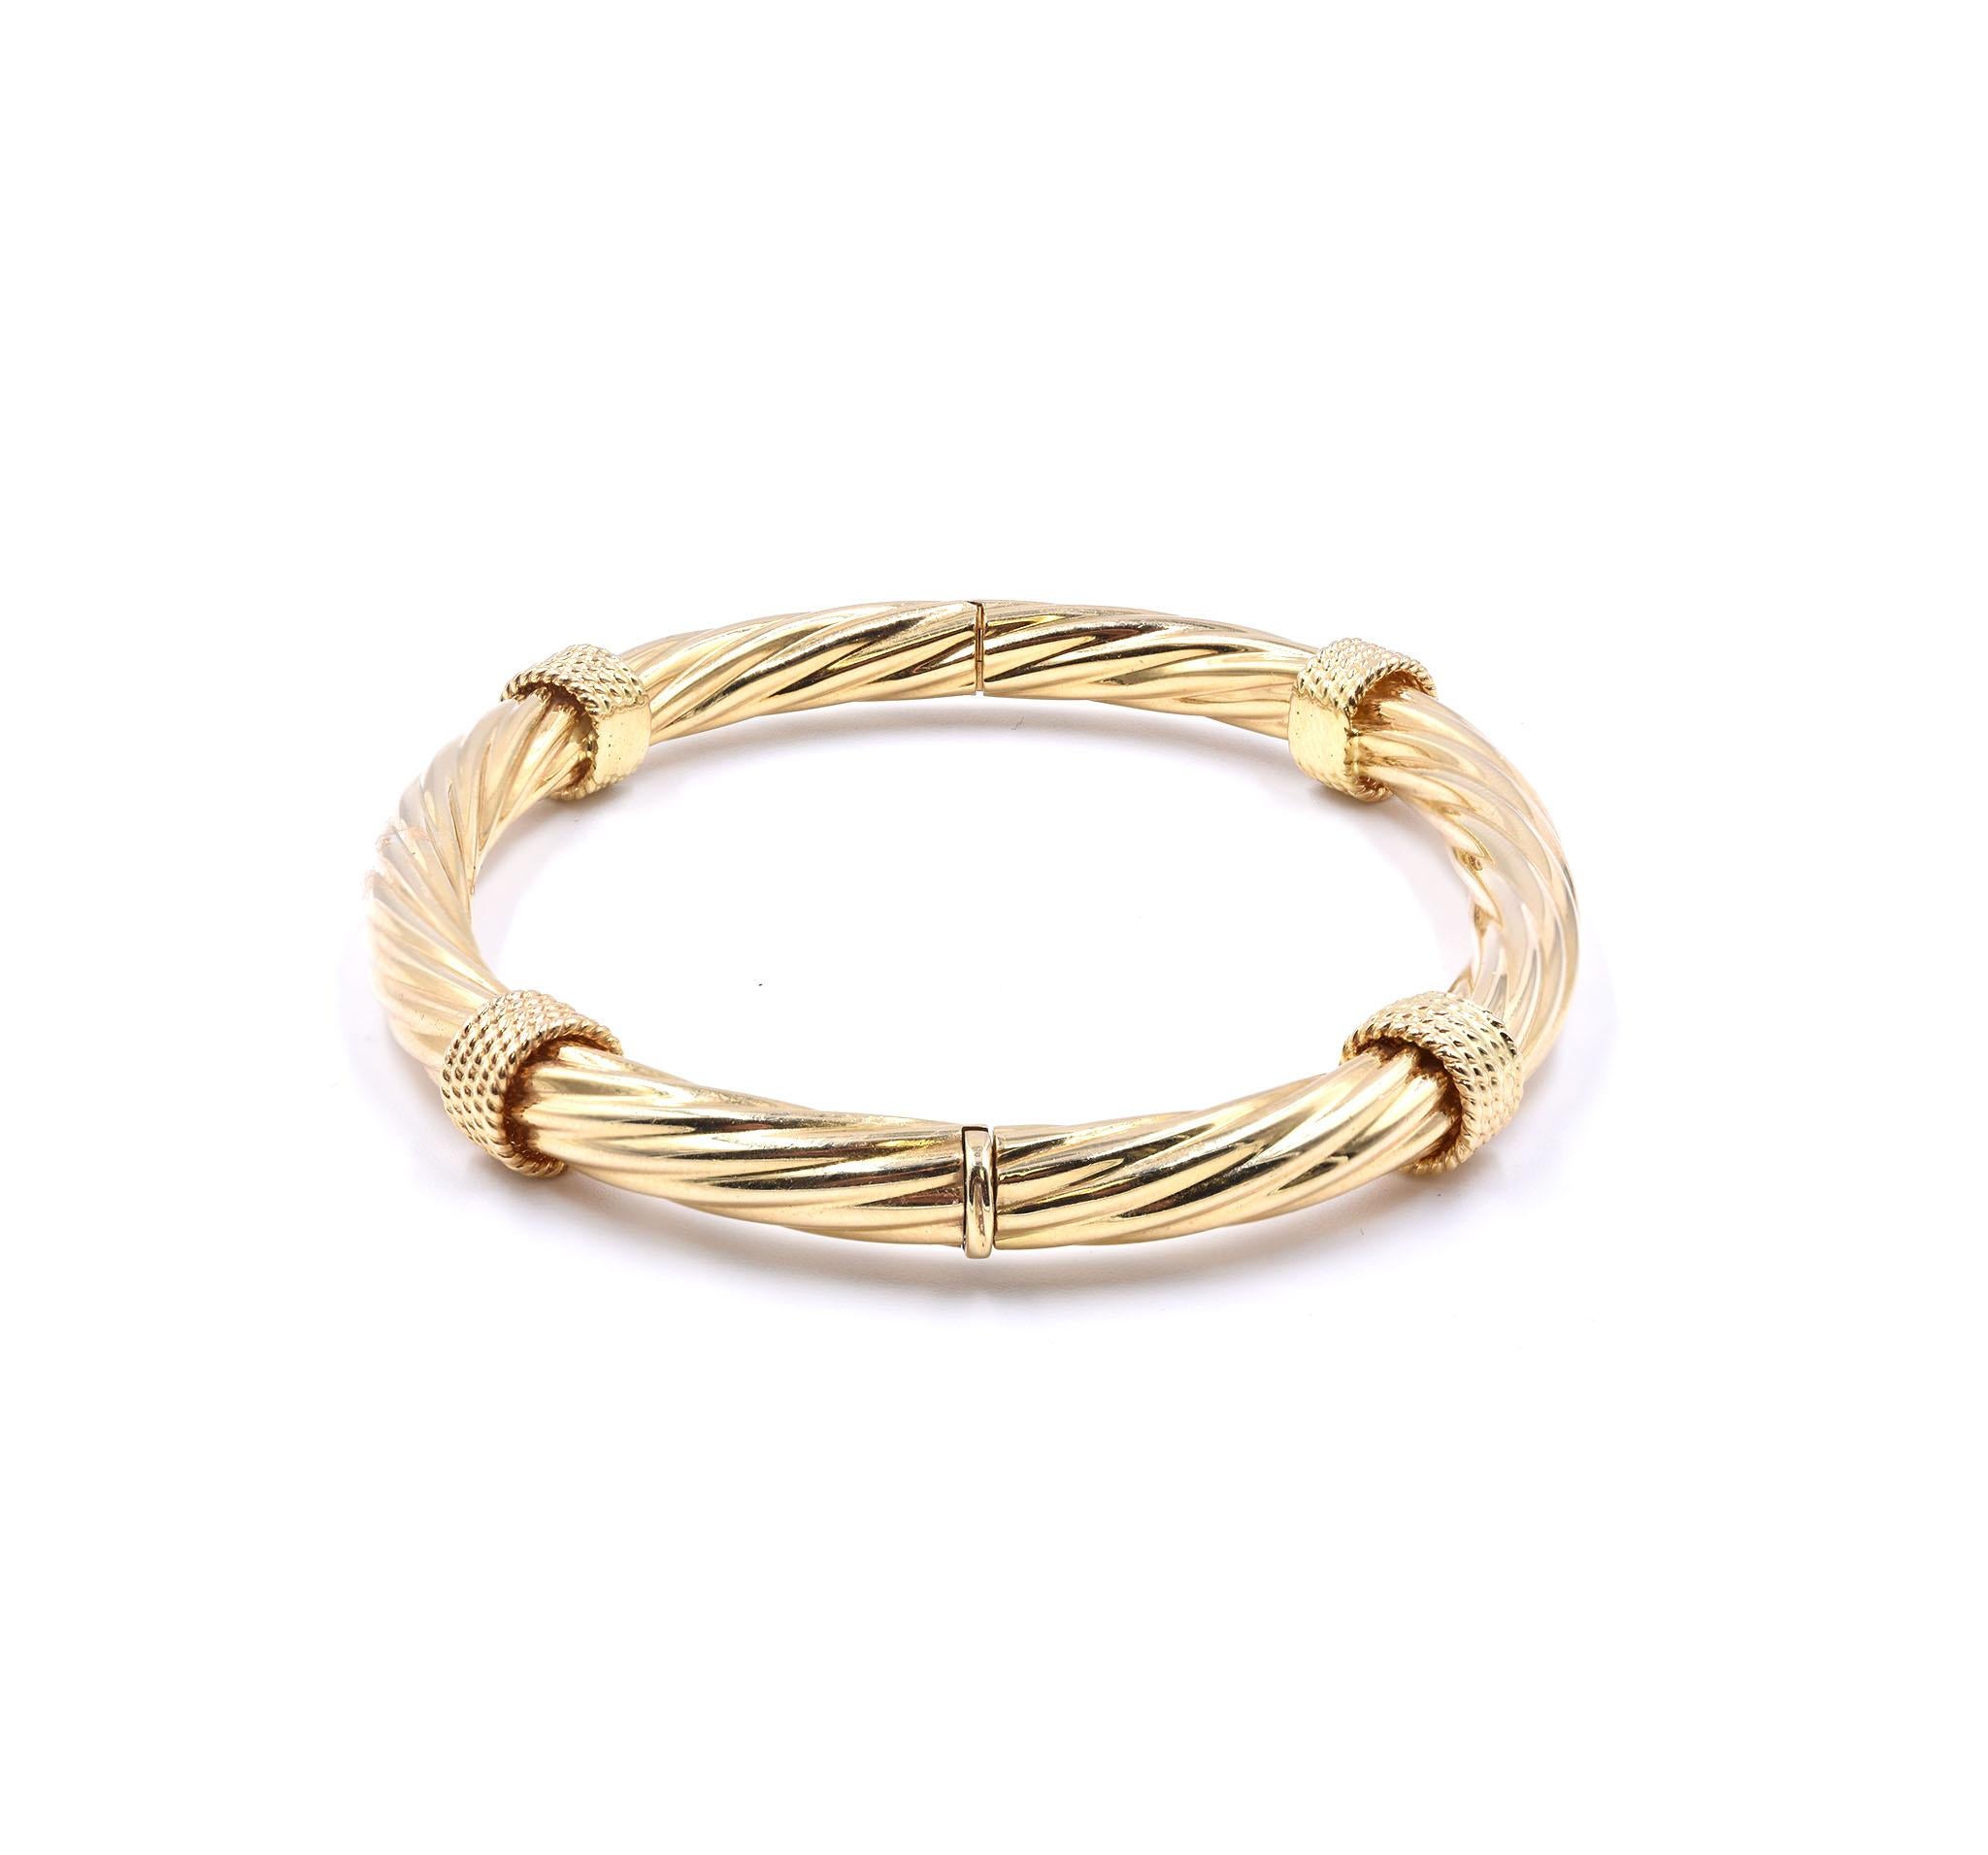 Designer: custom 
Material: 18k yellow gold
Dimensions: the bracelet will fit up to a 8.5-inch wrist, bracelet measures 8.5mm wide
Weight: 23.01 grams
